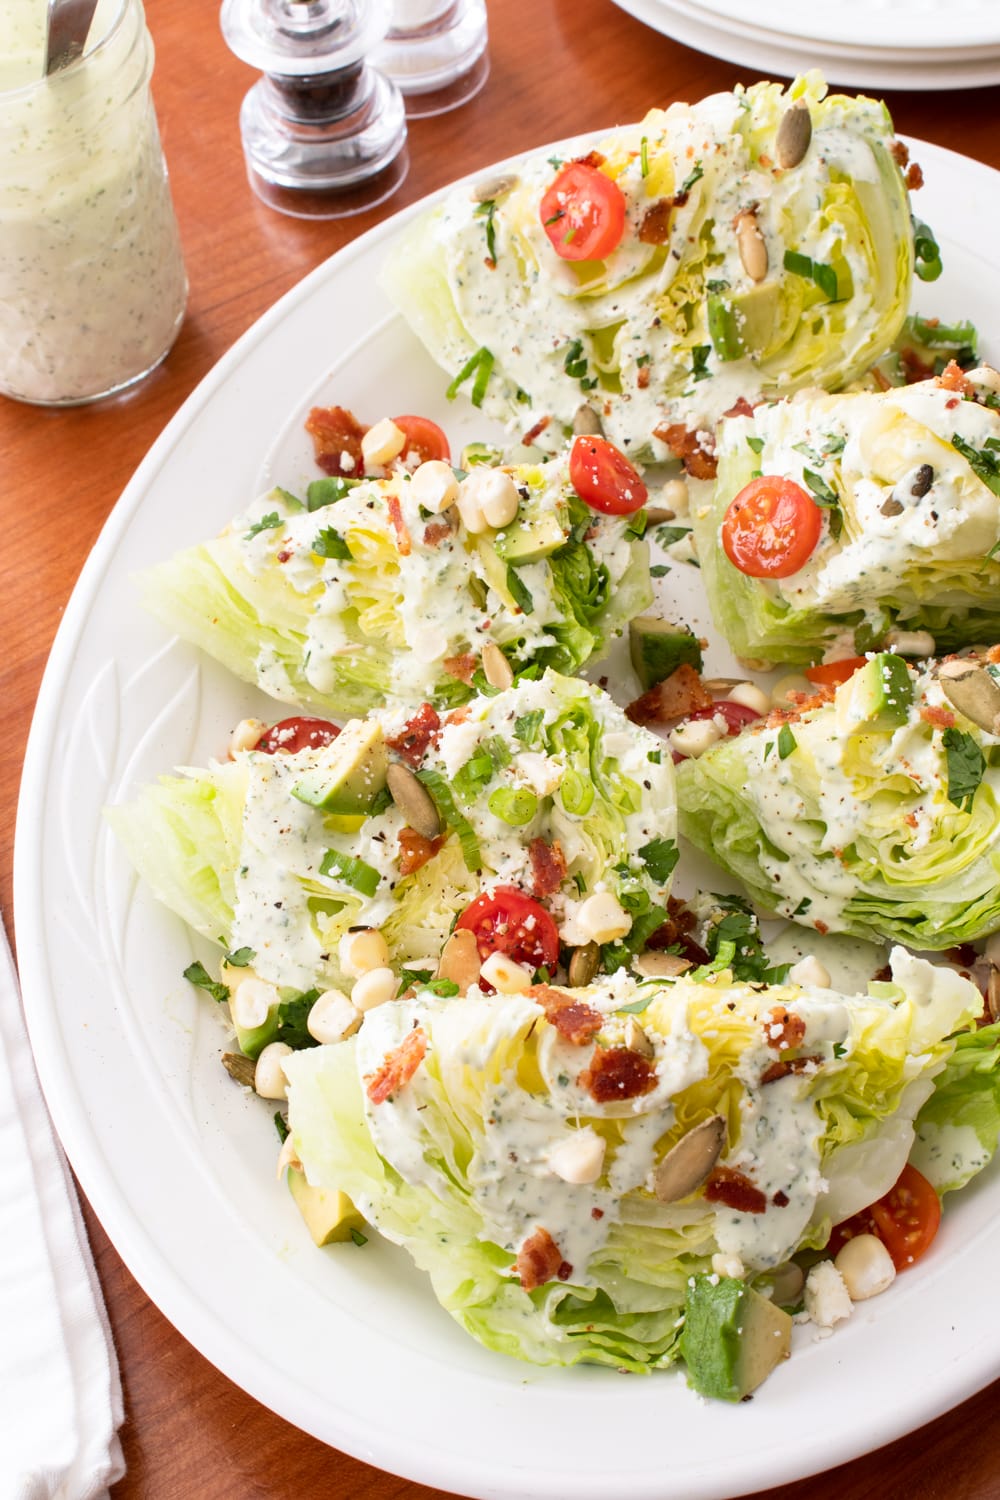 How to Cut Iceberg Lettuce for Wedge Salads, Tacos, & More